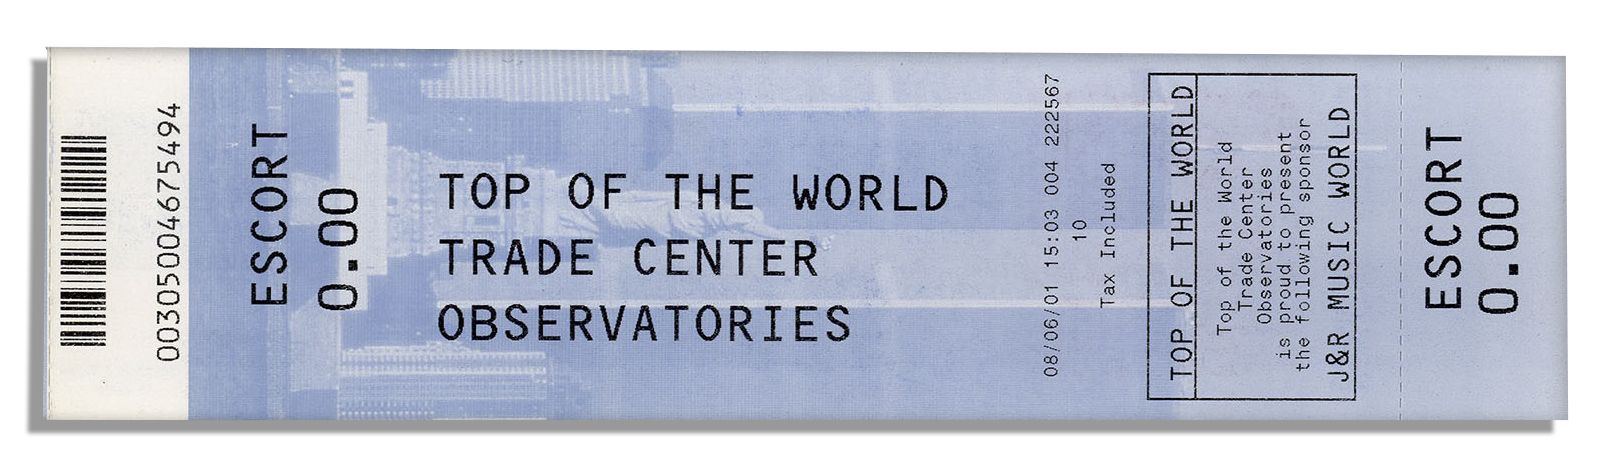 WORLD TRADE CENTER Ticket Top Of The World Observatories 2001 reprint 